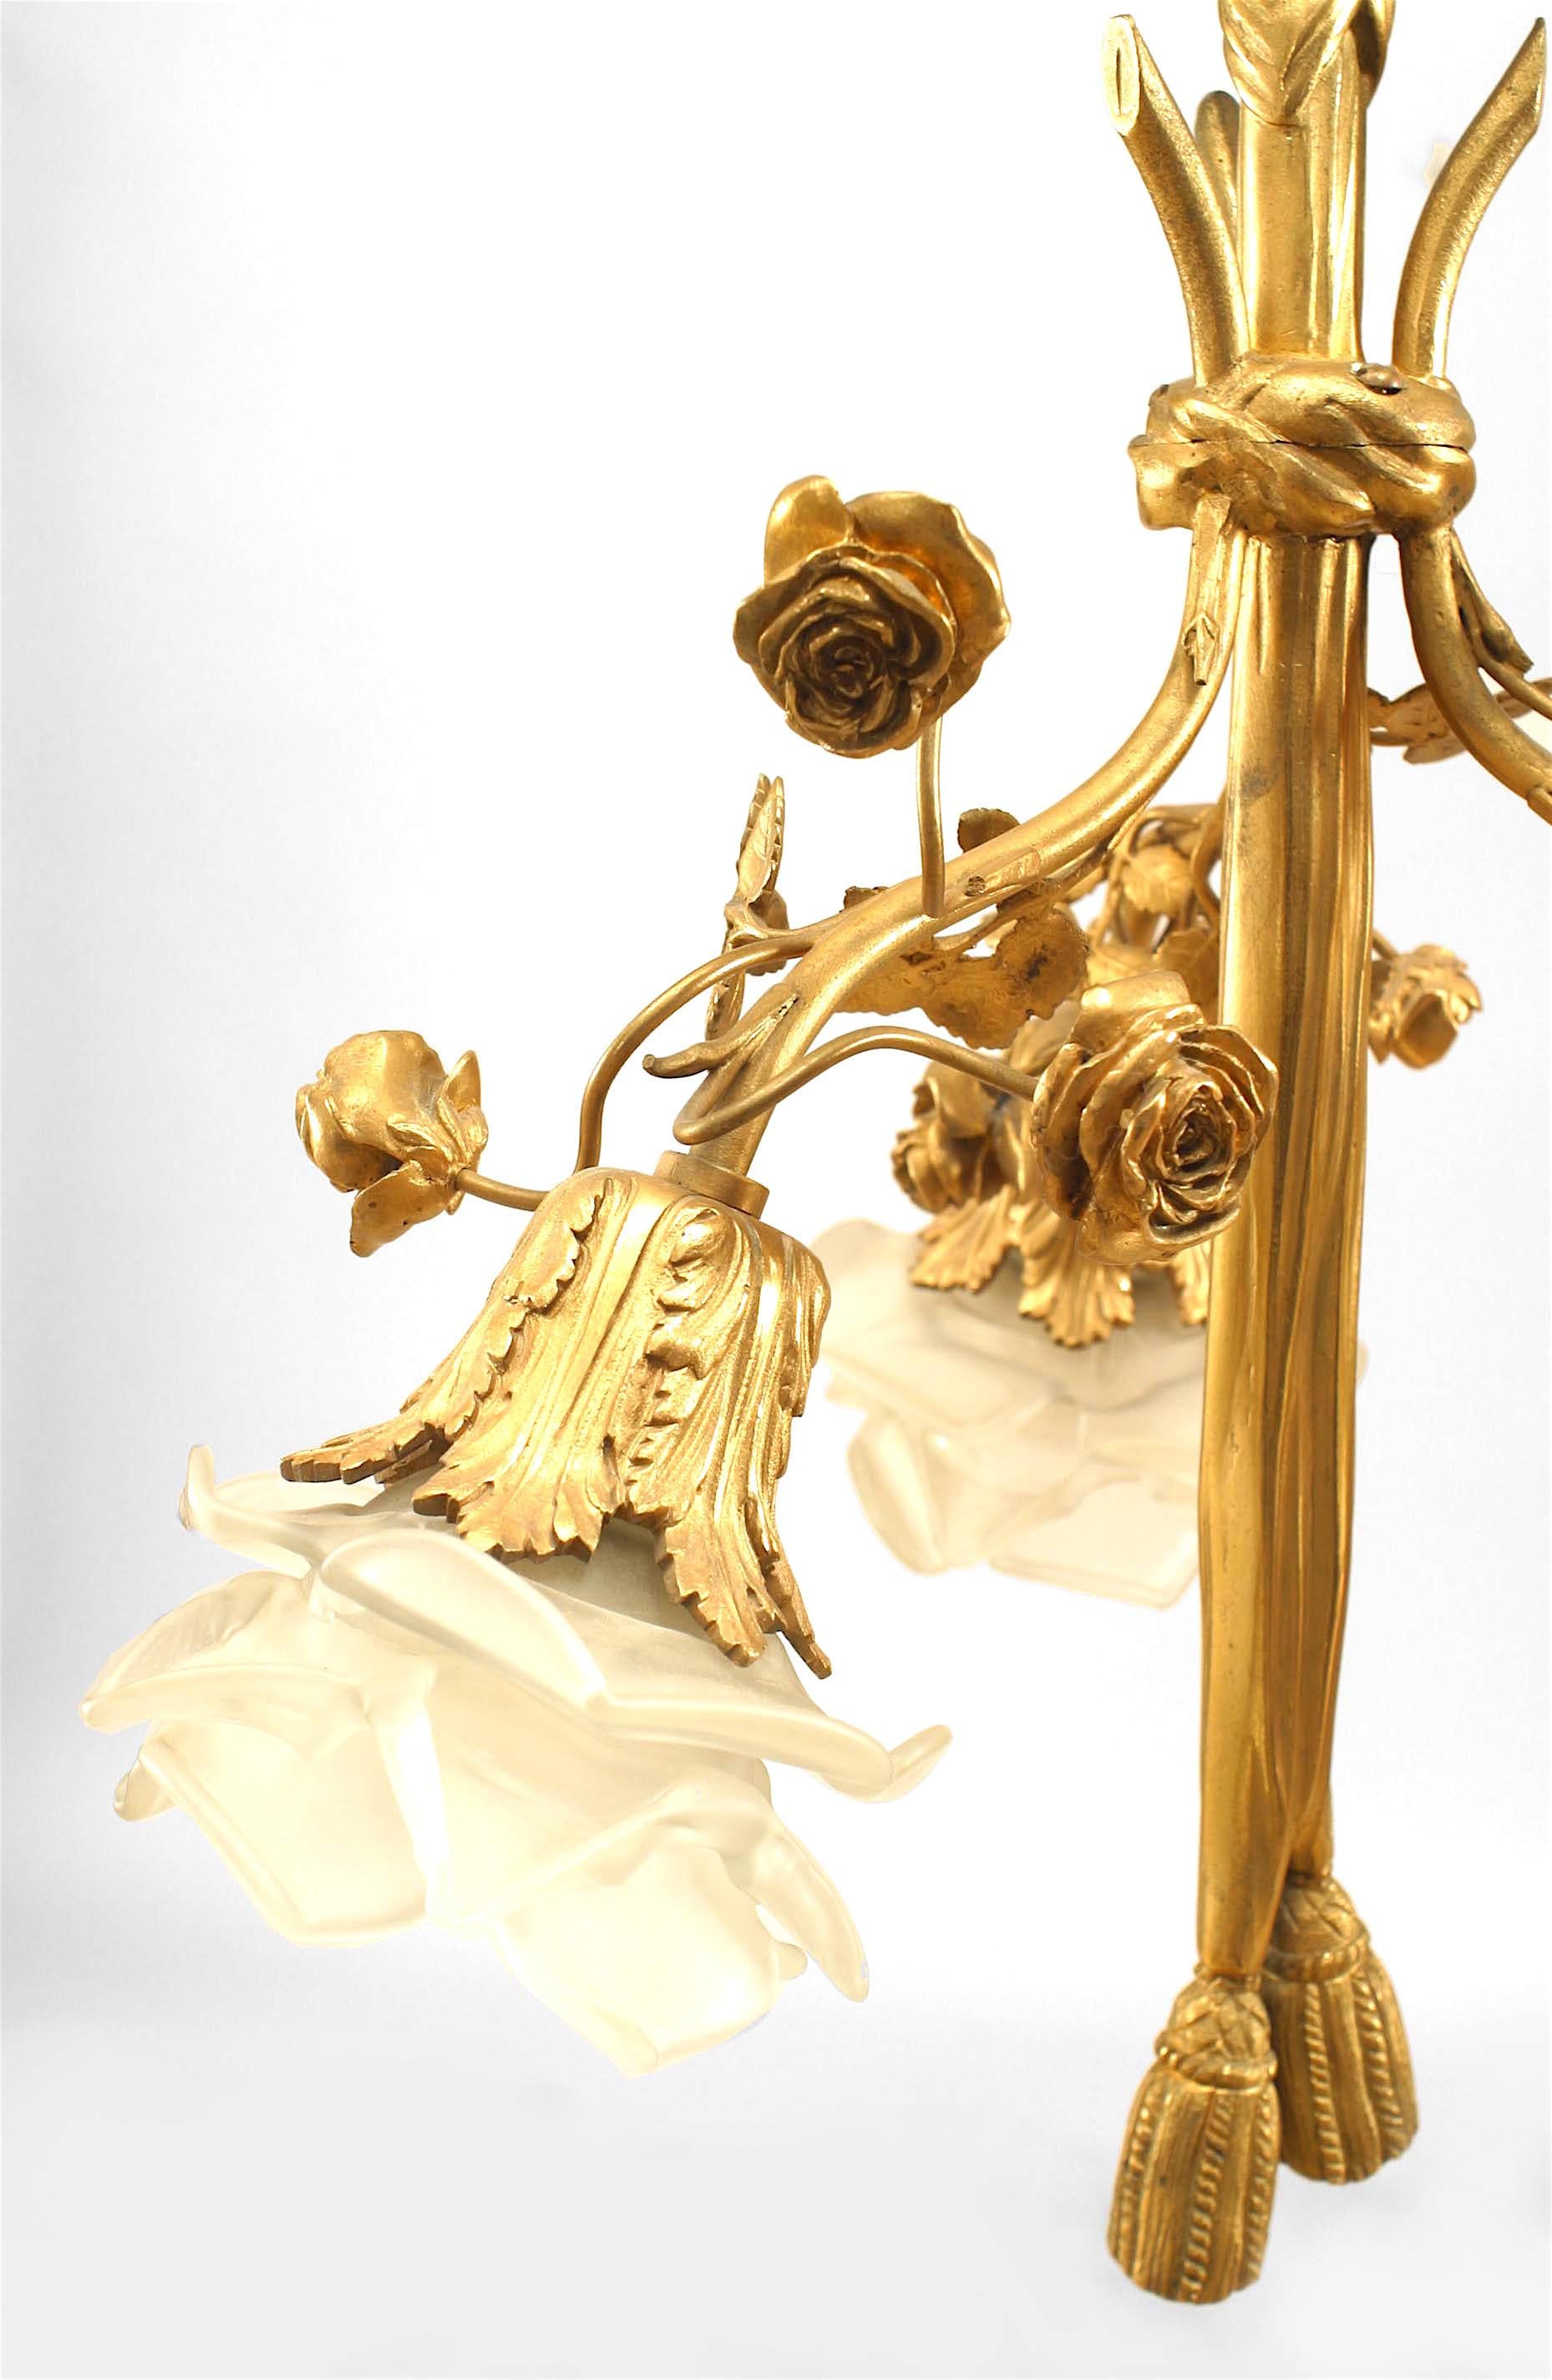 French Louis XVI-style gilt bronze chandelier with embellished with flowers and centered with a drape ending in tassels with 3 arms ending with glass flower shades.
